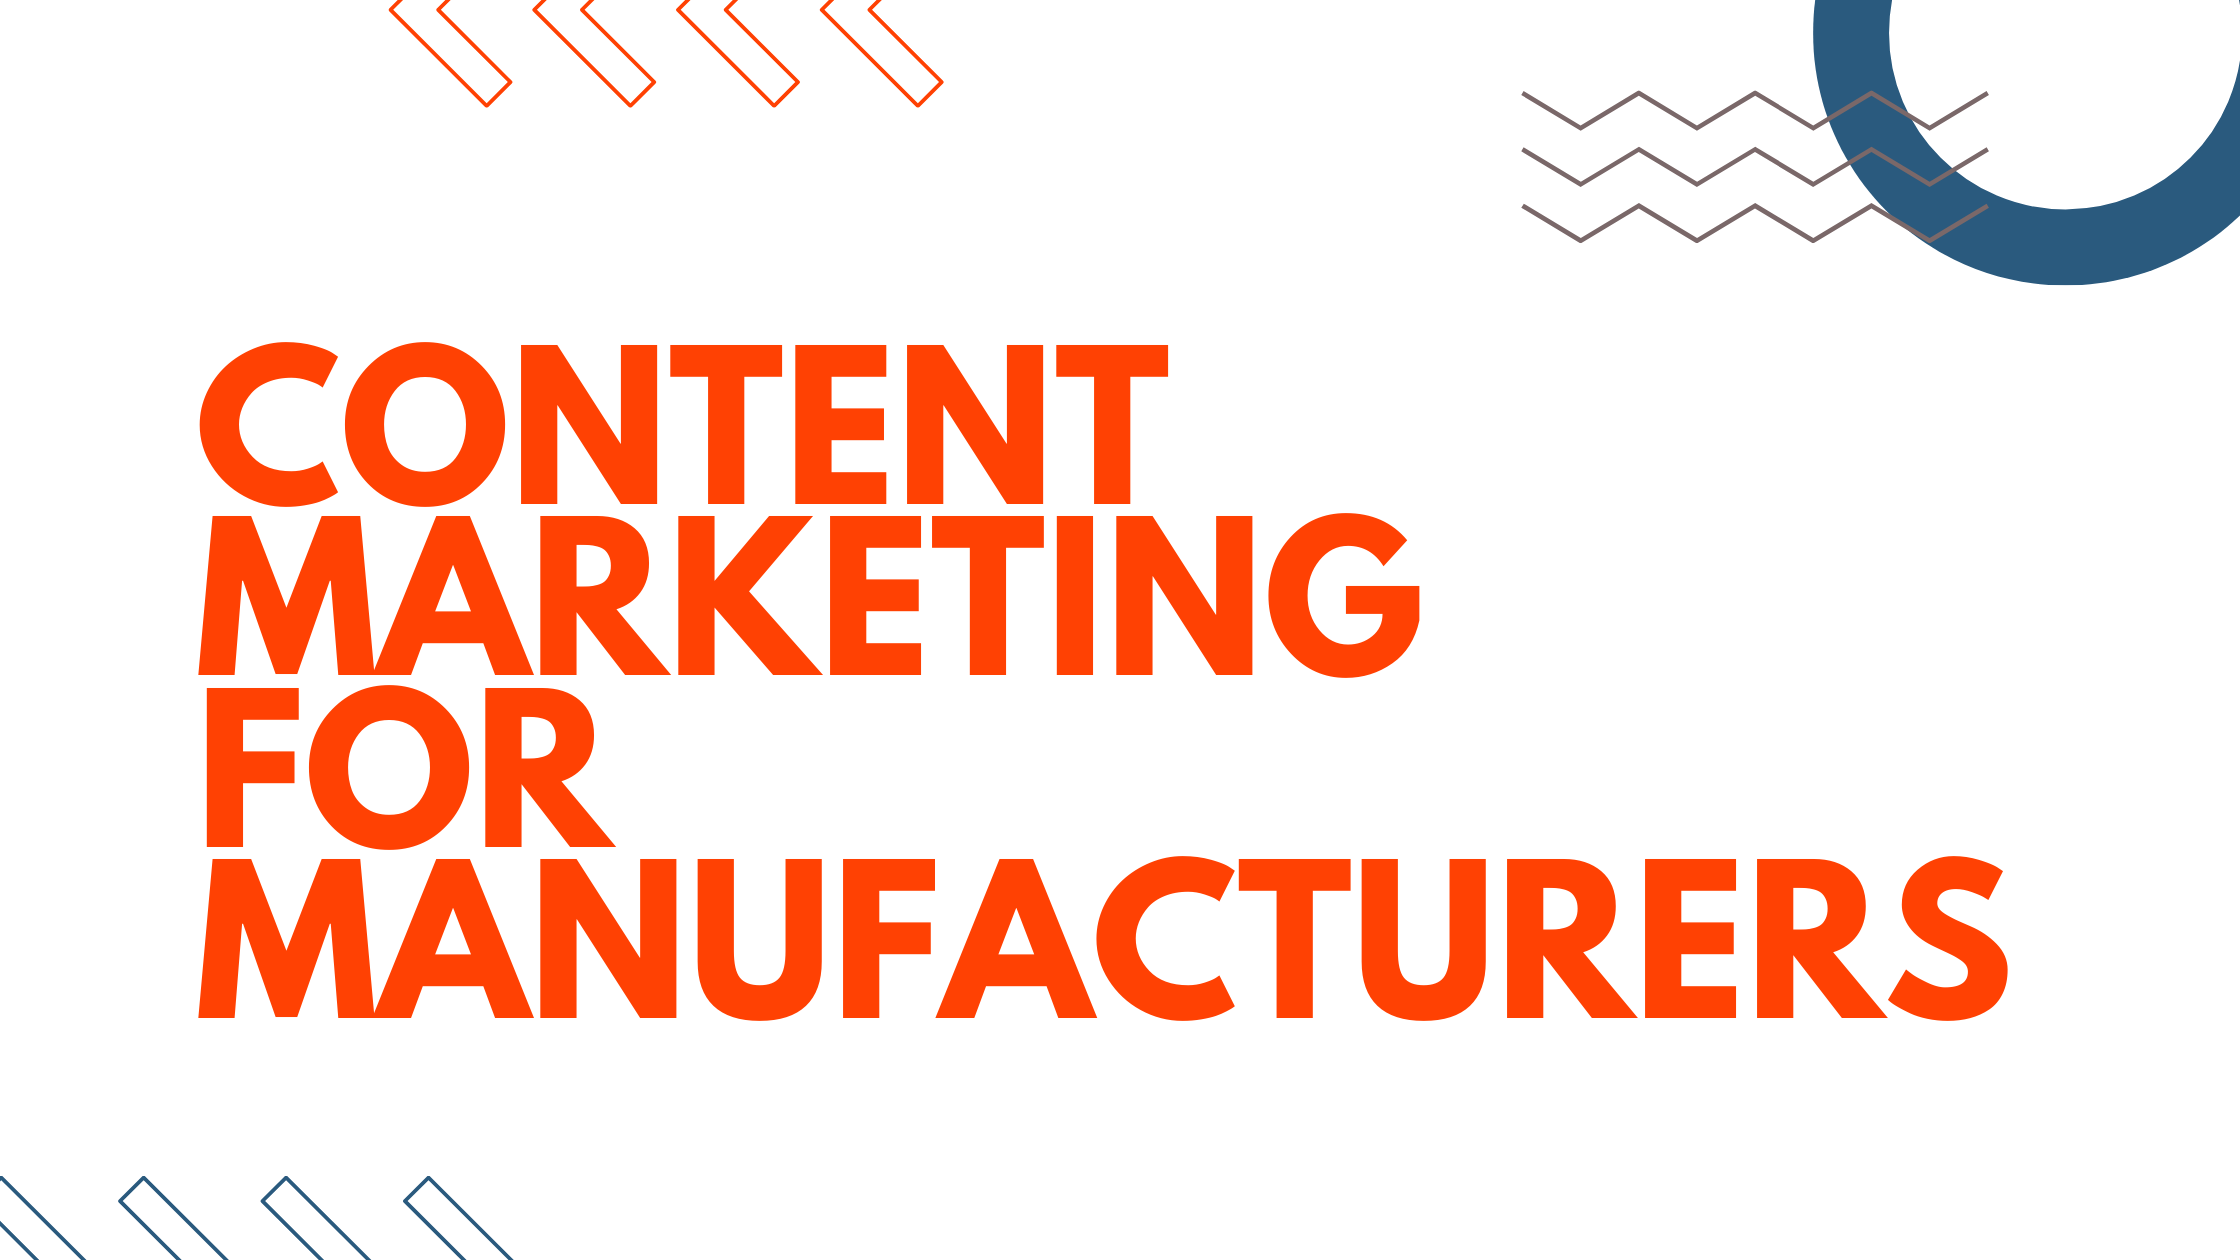 Content Marketing For Manufacturers